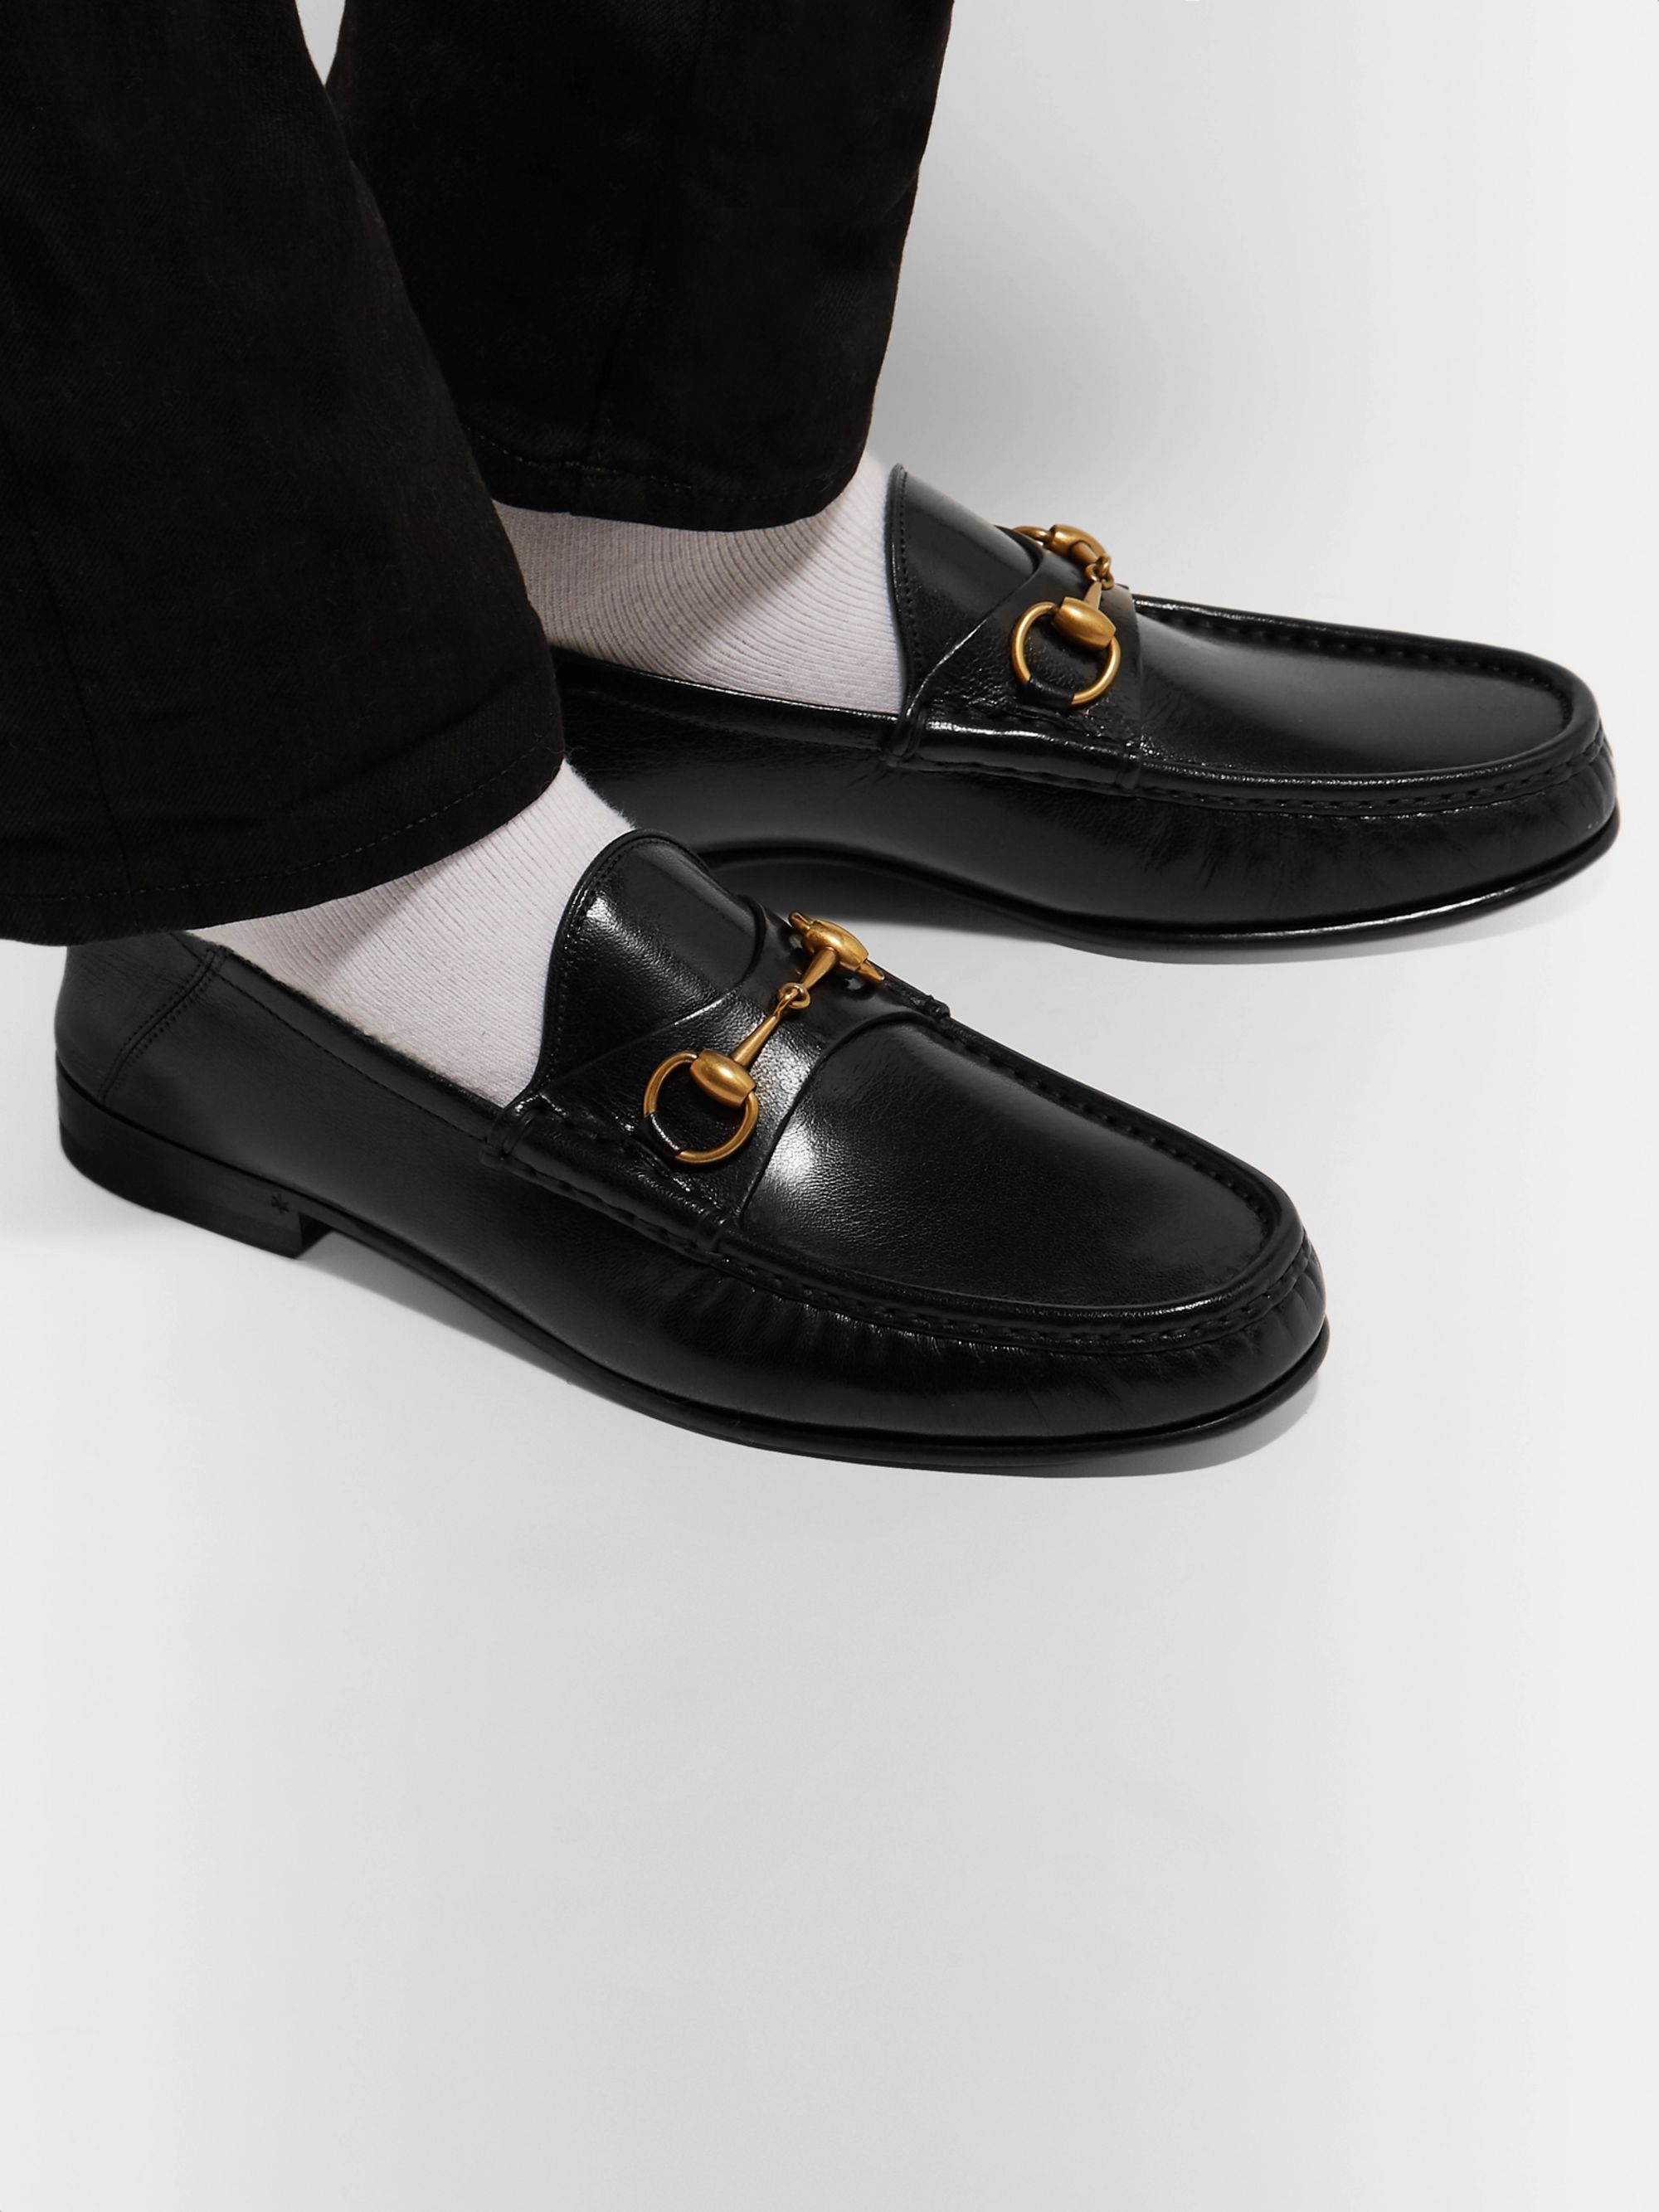 gucci collapsible heel loafer